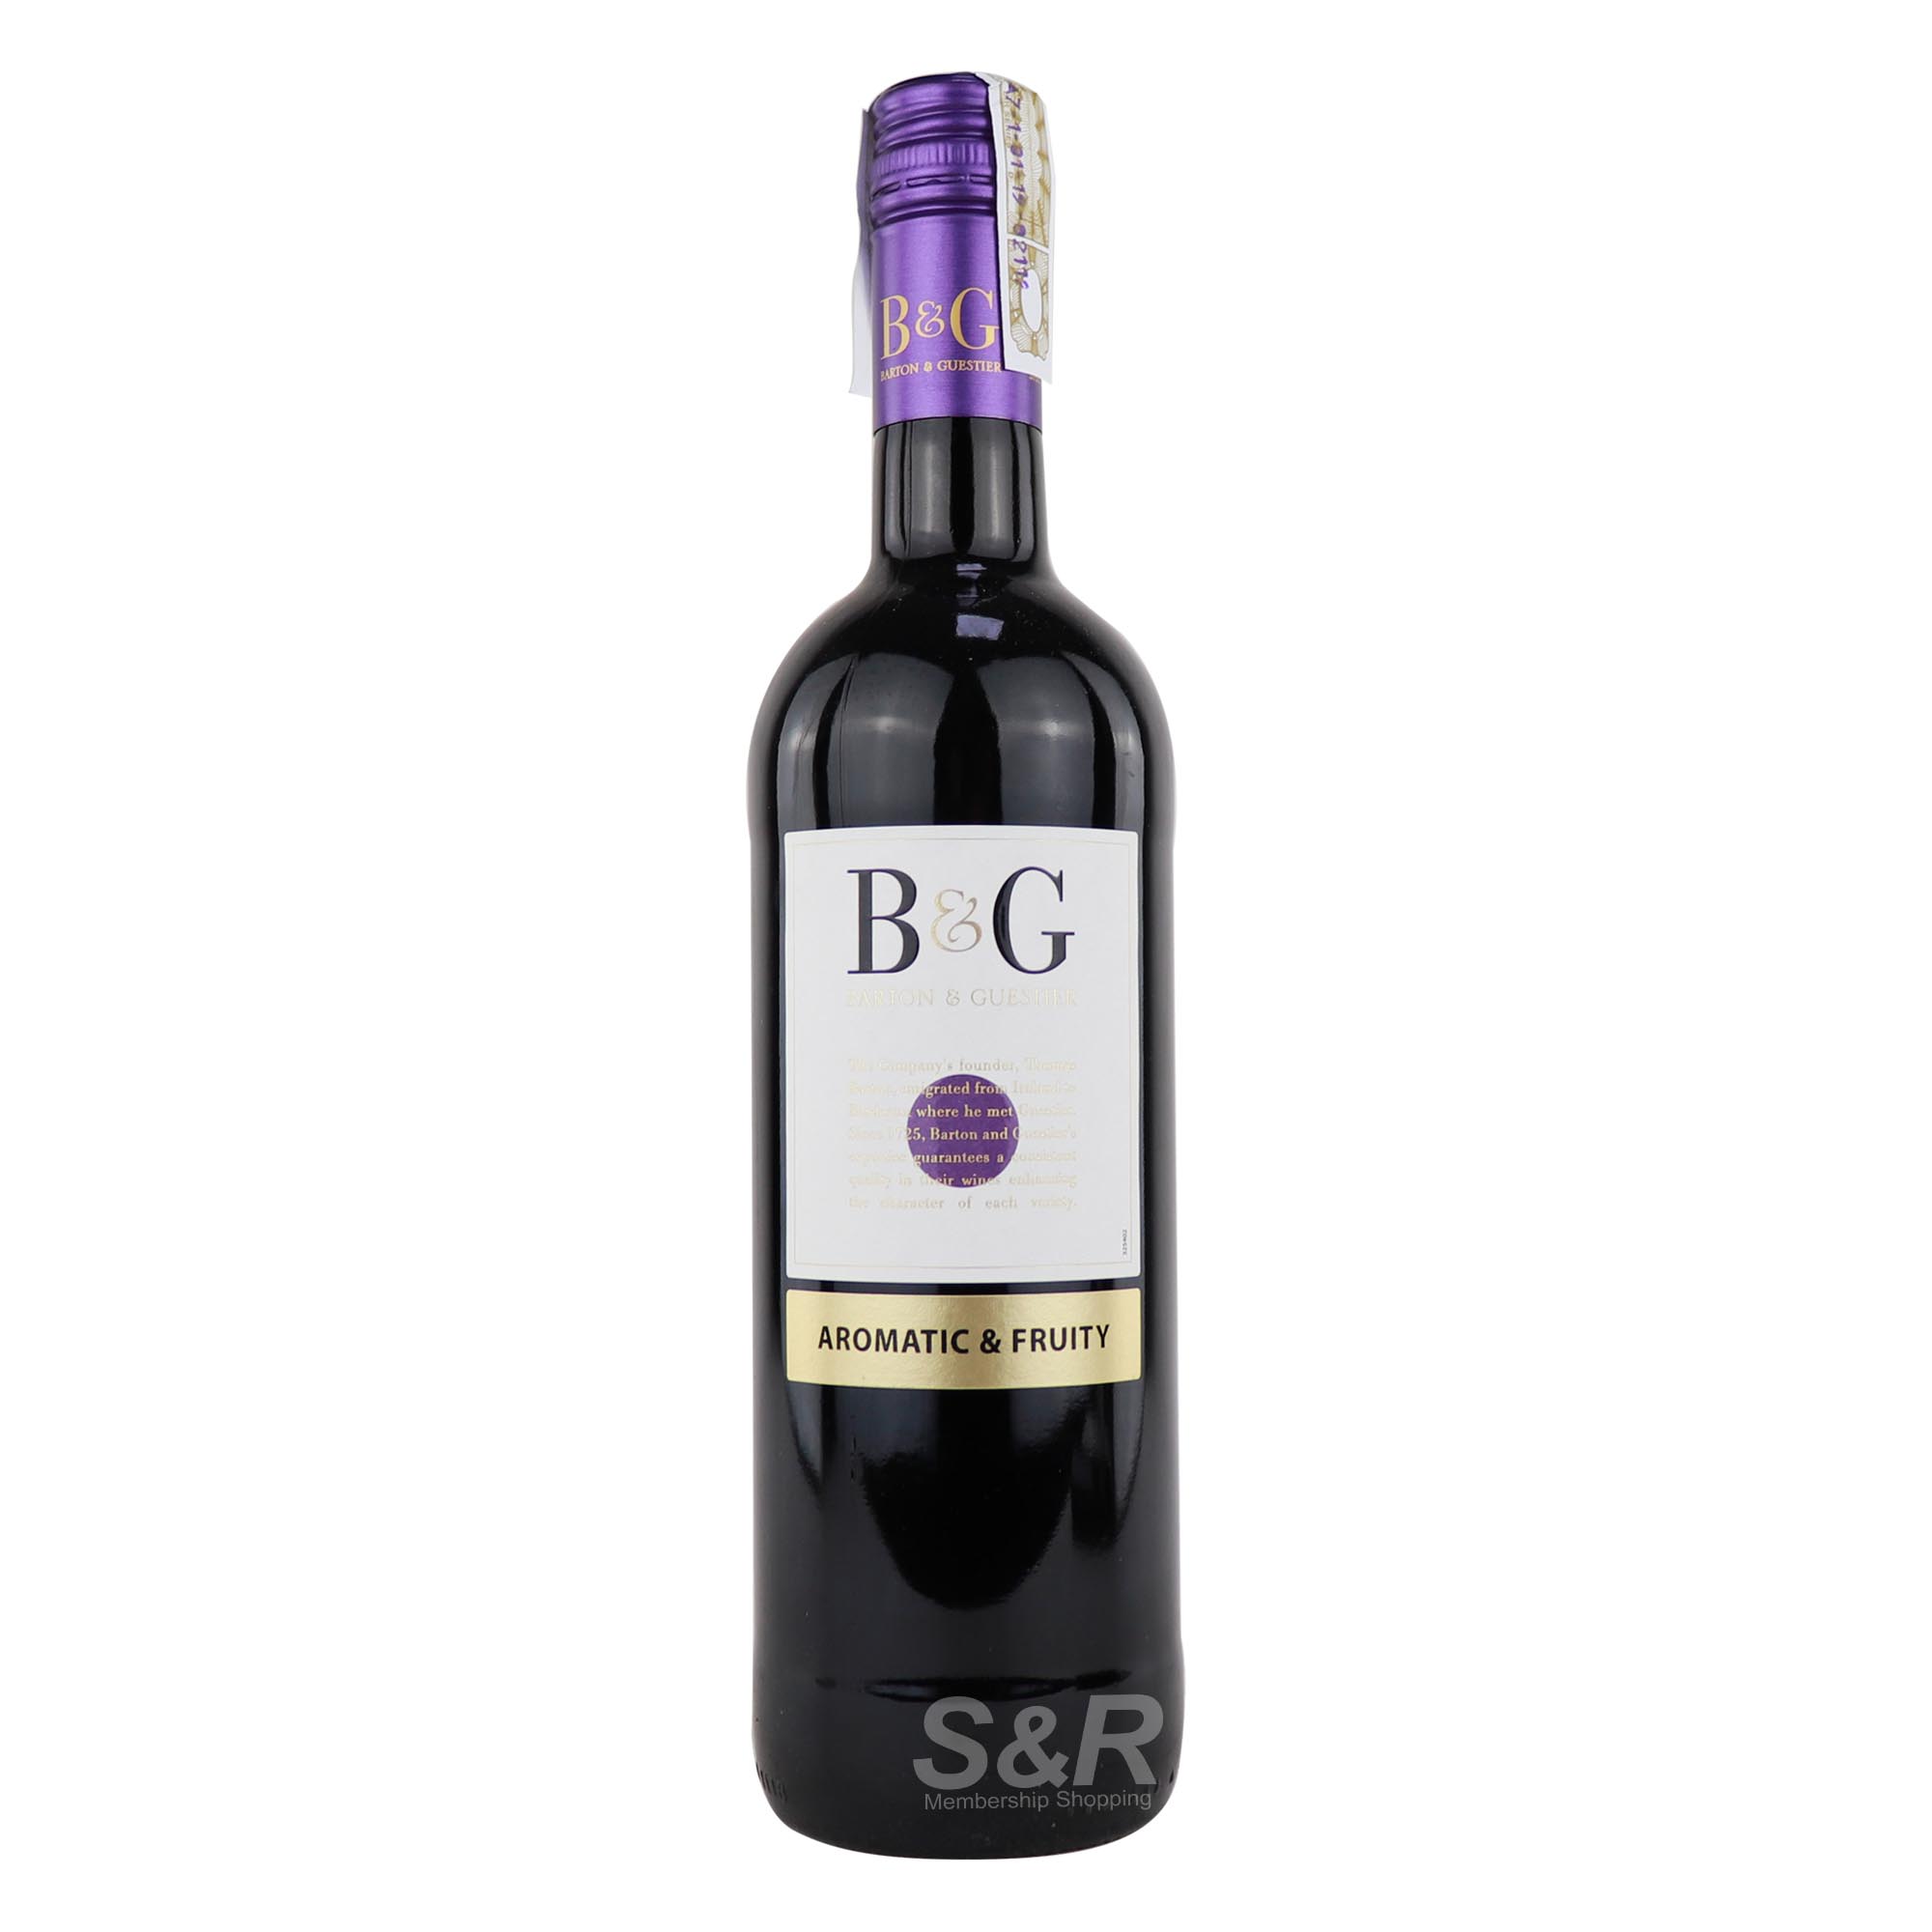 B&G Aromatic And Fruity Red Wine 750mL